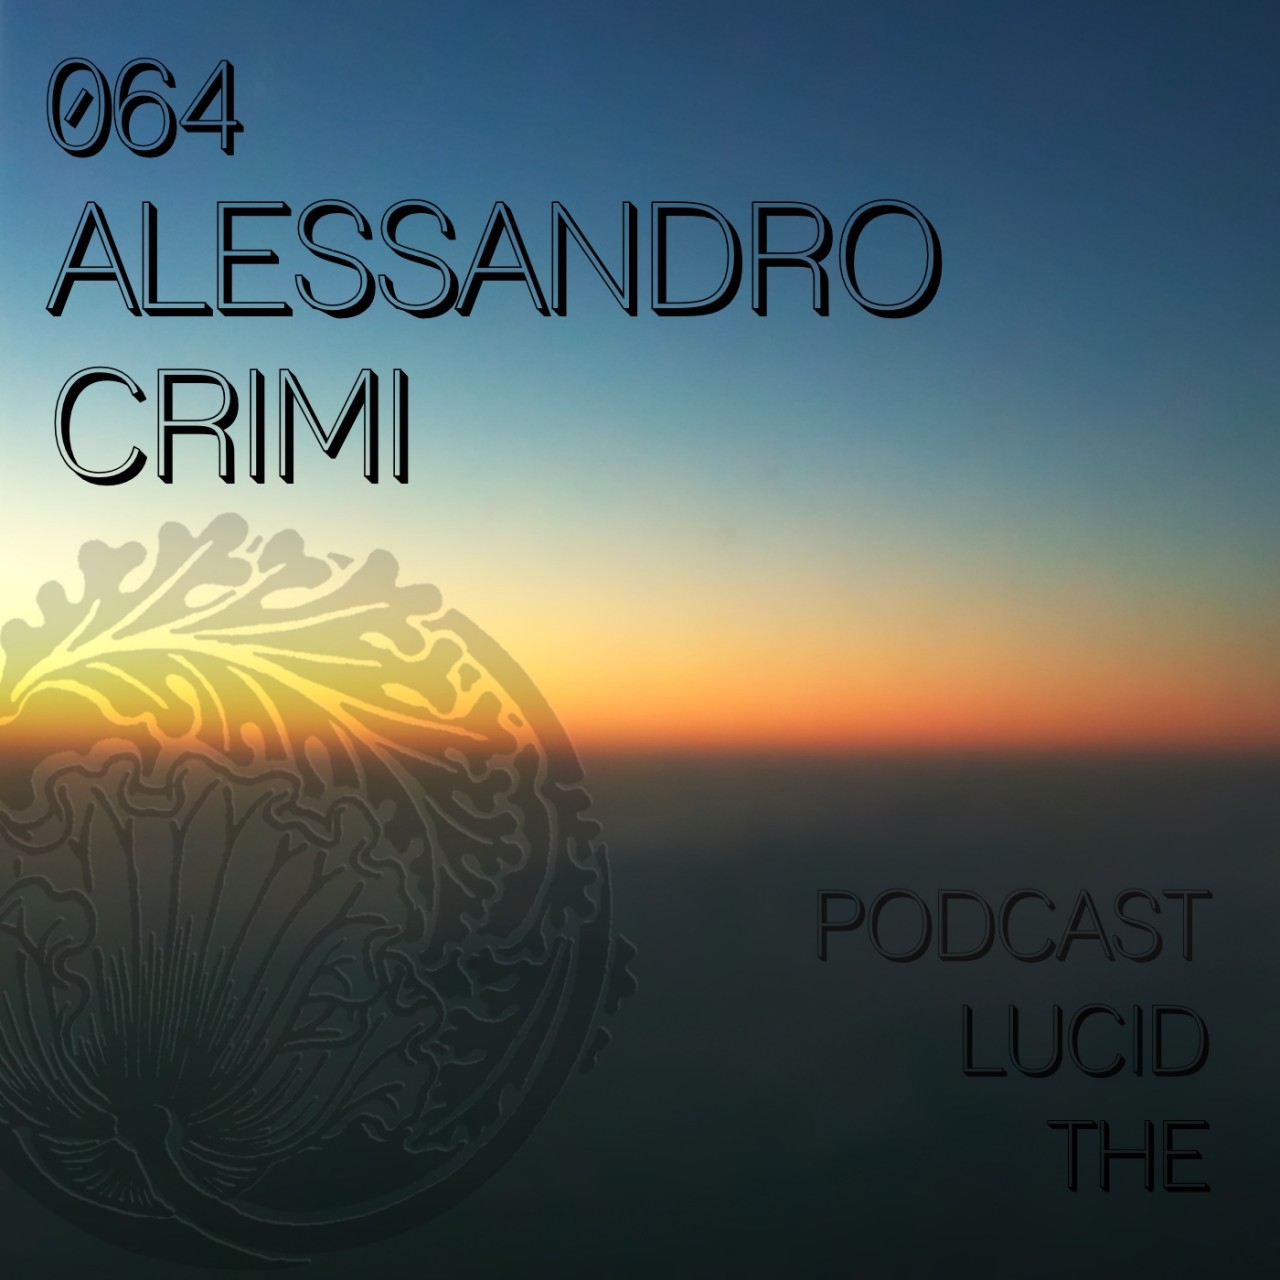 The Lucid Podcast 064 Alessandro Crimi